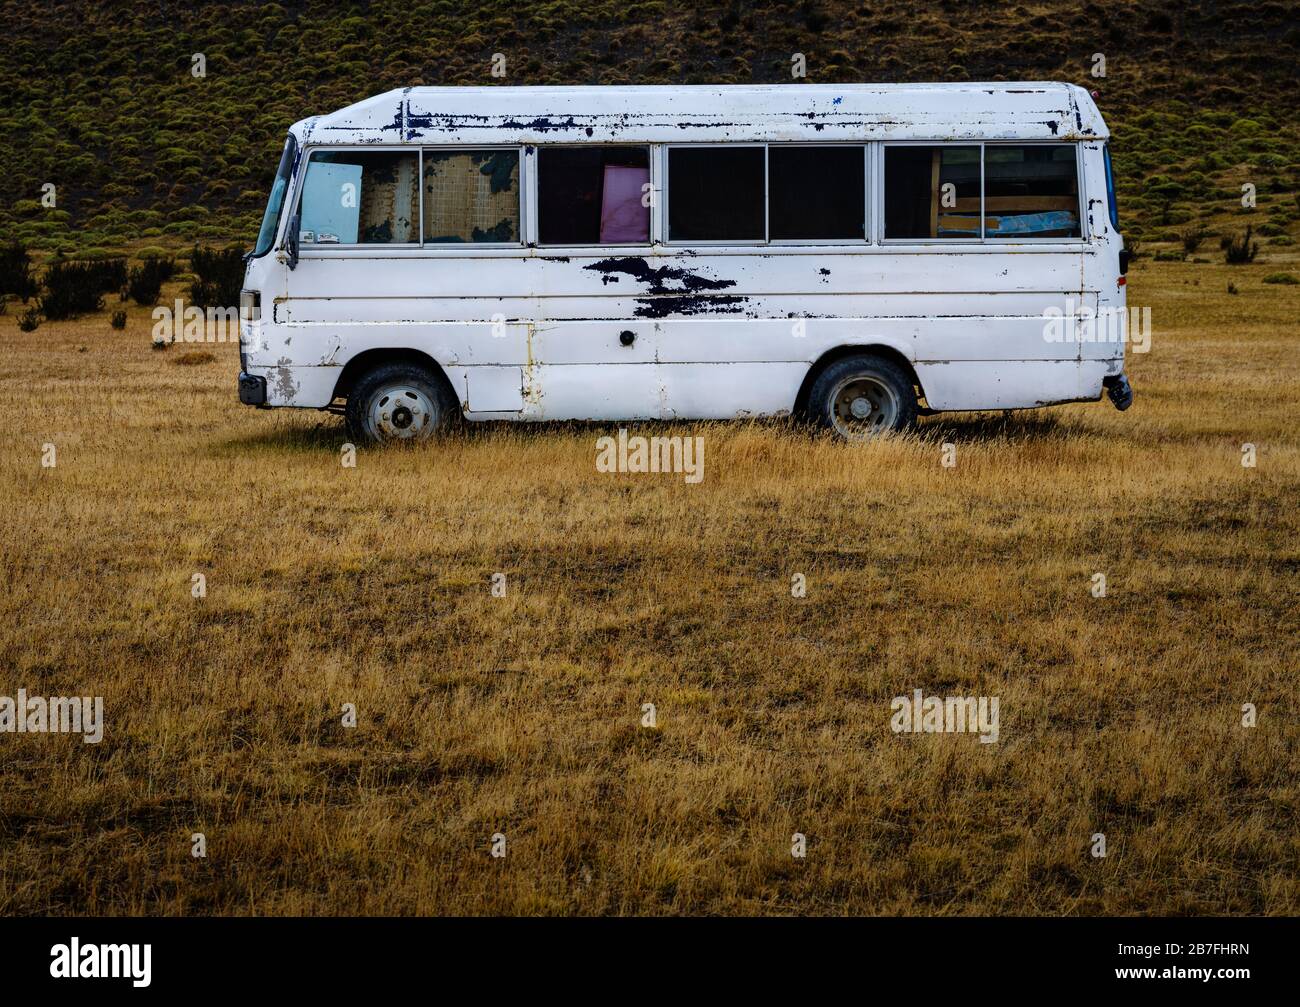 NATIONAL PARK TORRES DEL PAINE, CHILE - CIRCA FEBRUARY 2019: Abandoned bus in Torres del Paine National Park, Chile. Stock Photo